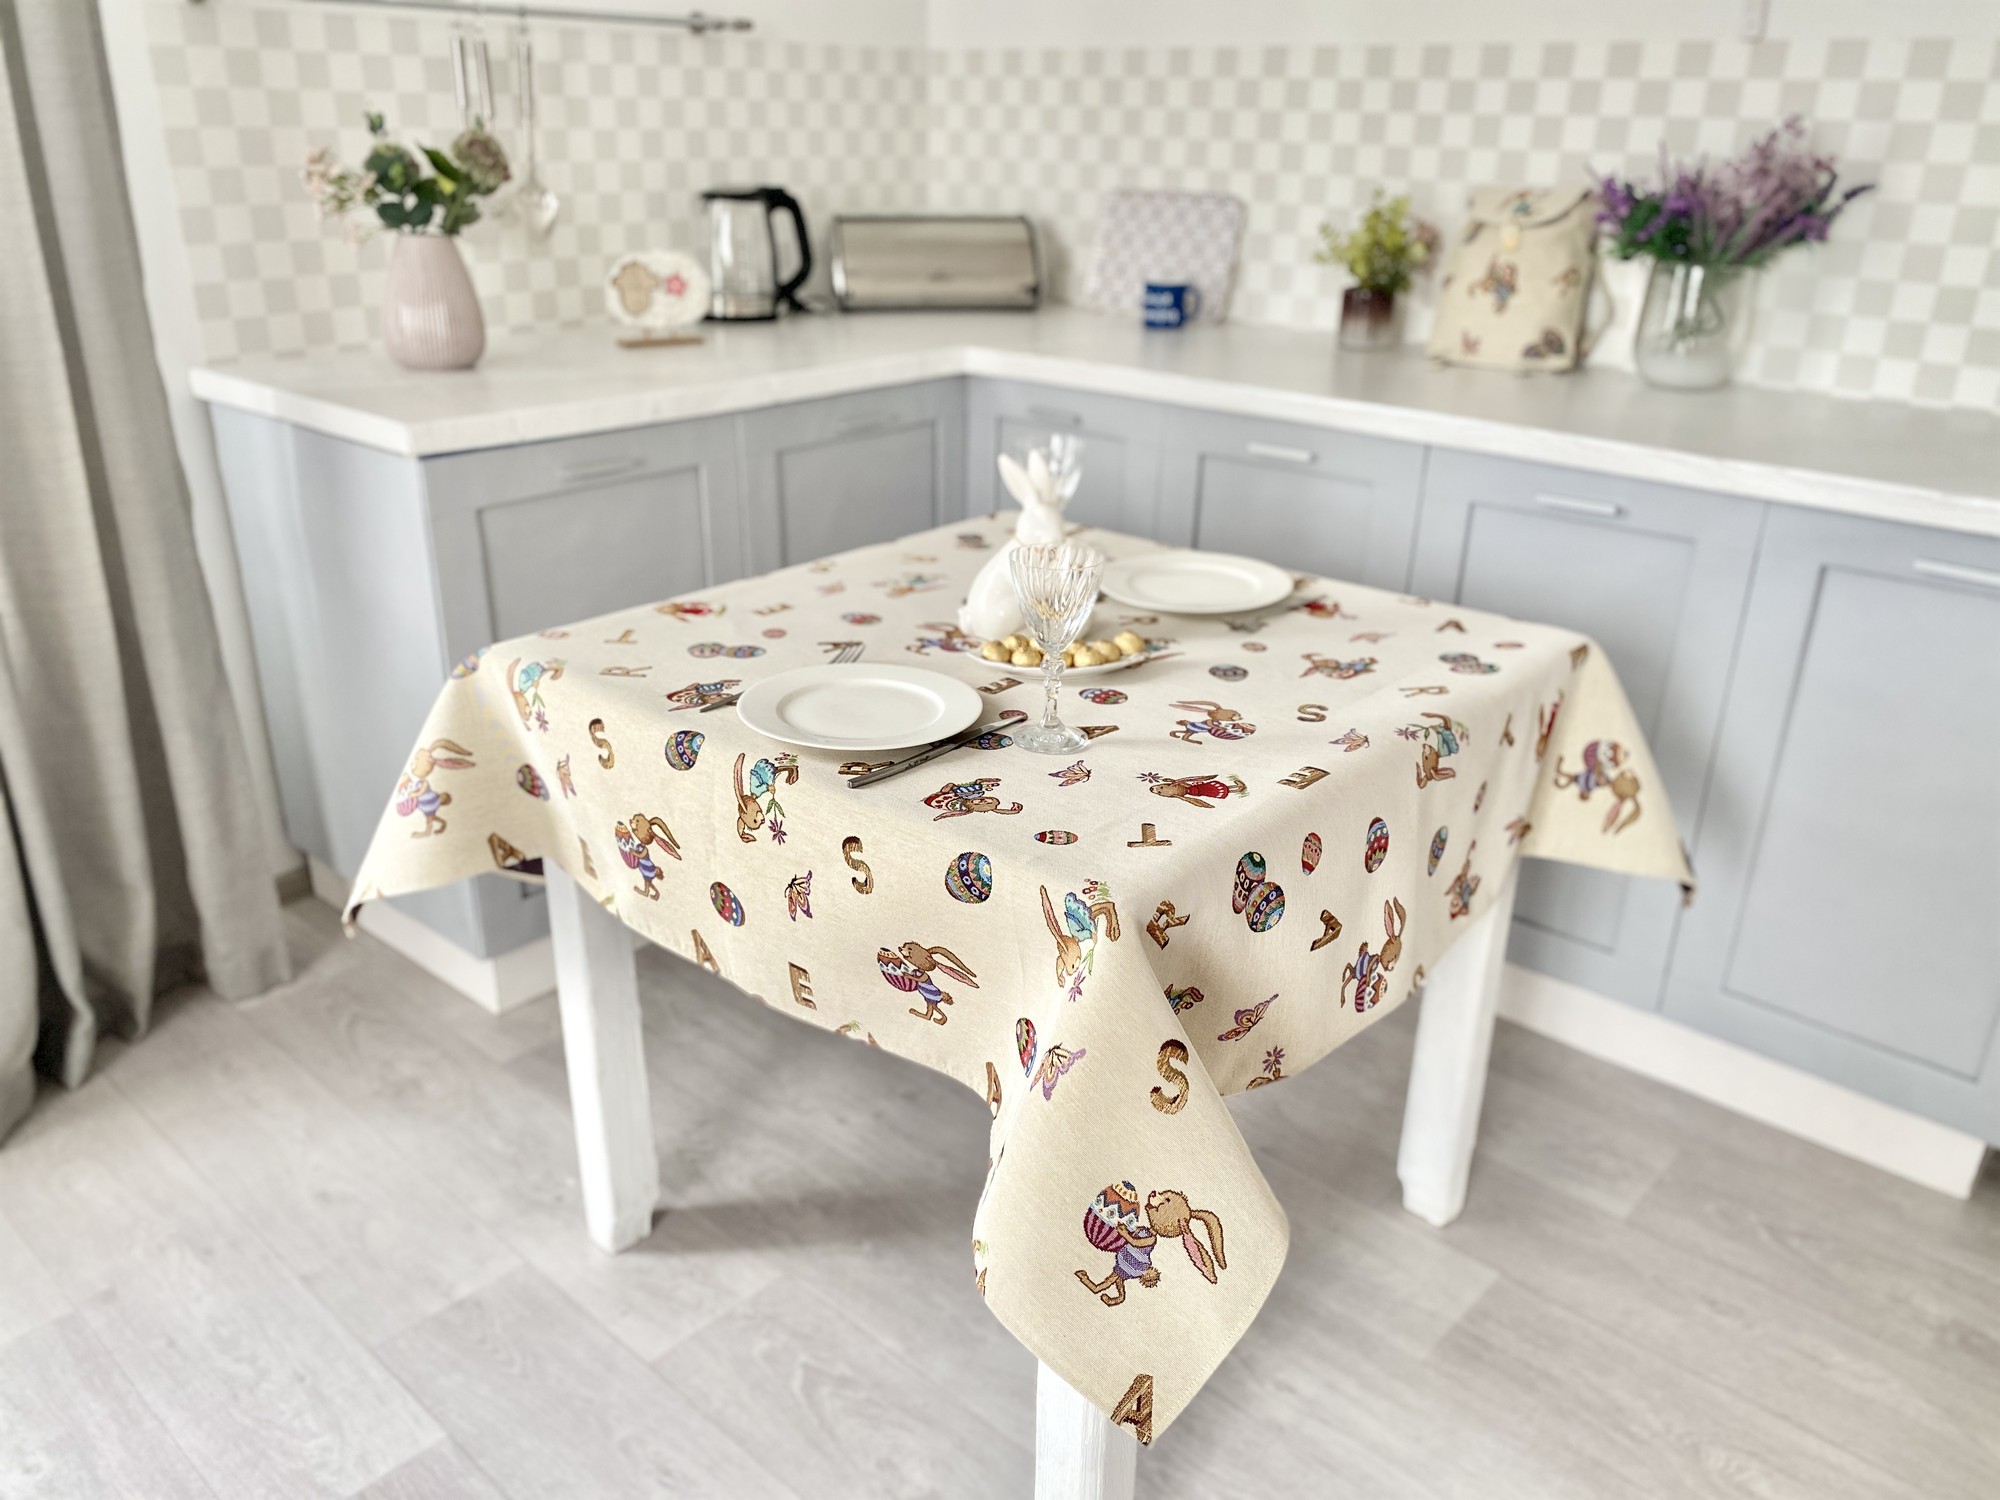 Easter tapestry tablecloth 54x94 in (137 x 240 cm.) festive tablecloth